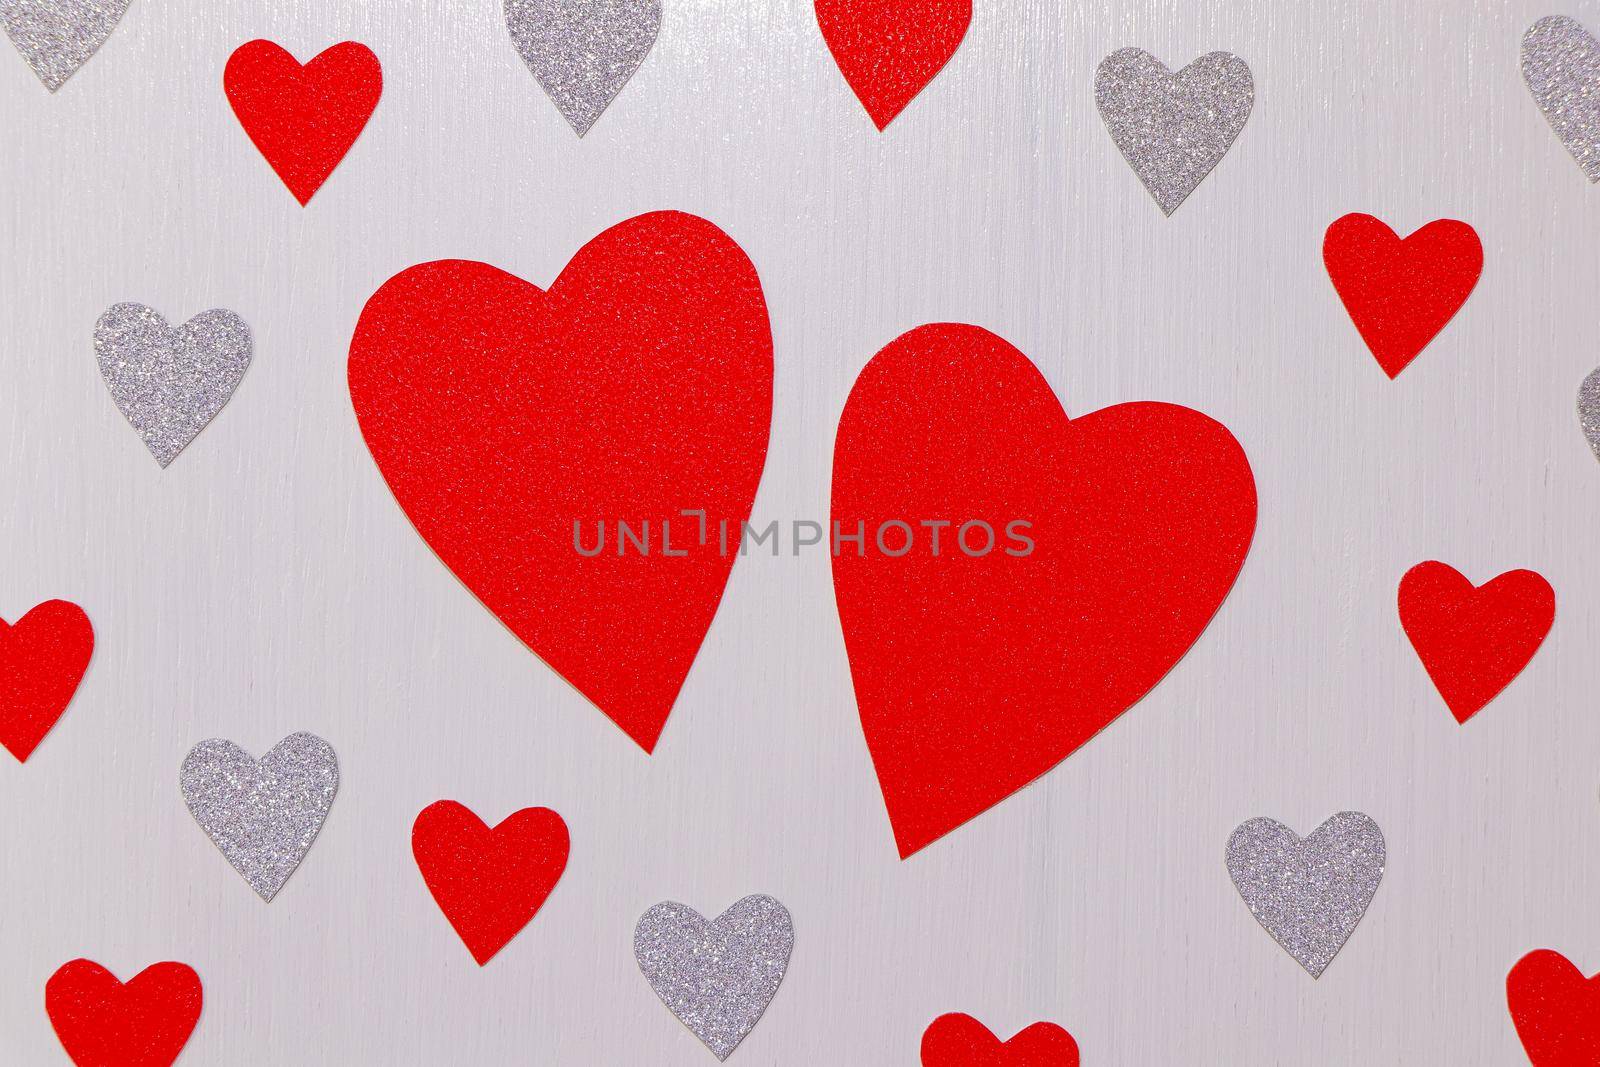 Big Red Hearts With Small Hearts On Textured White by jjvanginkel